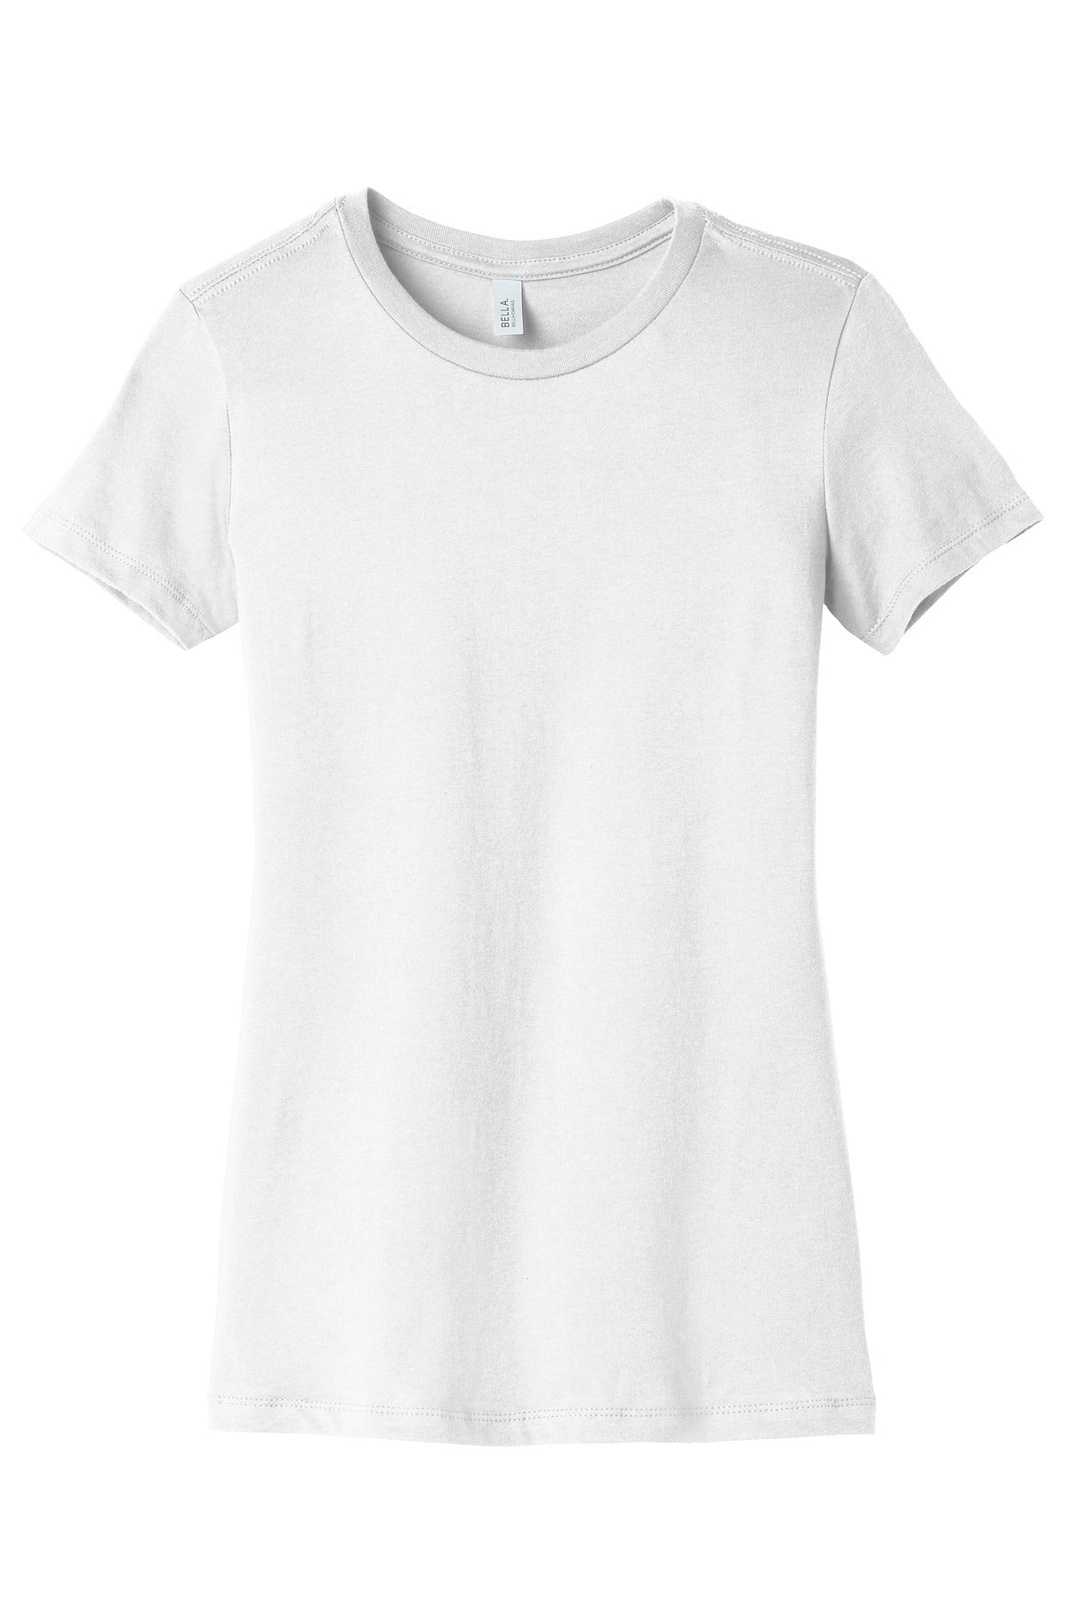 Bella + Canvas 6004 Women's The Favorite Tee - White - HIT a Double